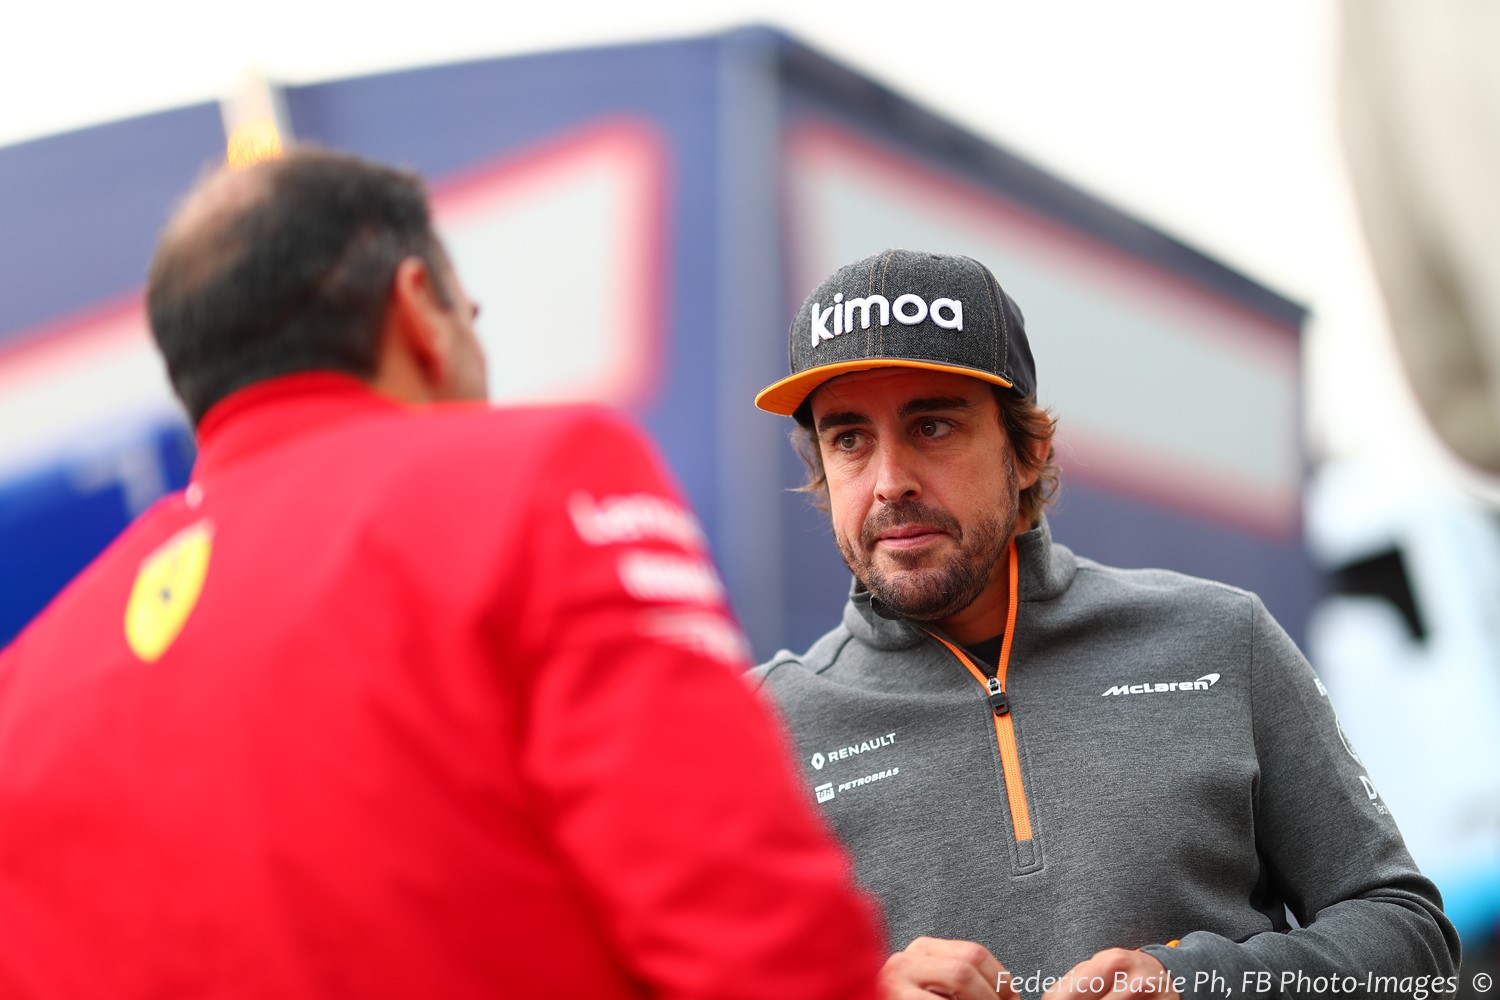 Fernando Alonso's best hope is if Vettel does not re-sign with Ferrari, but he likely will